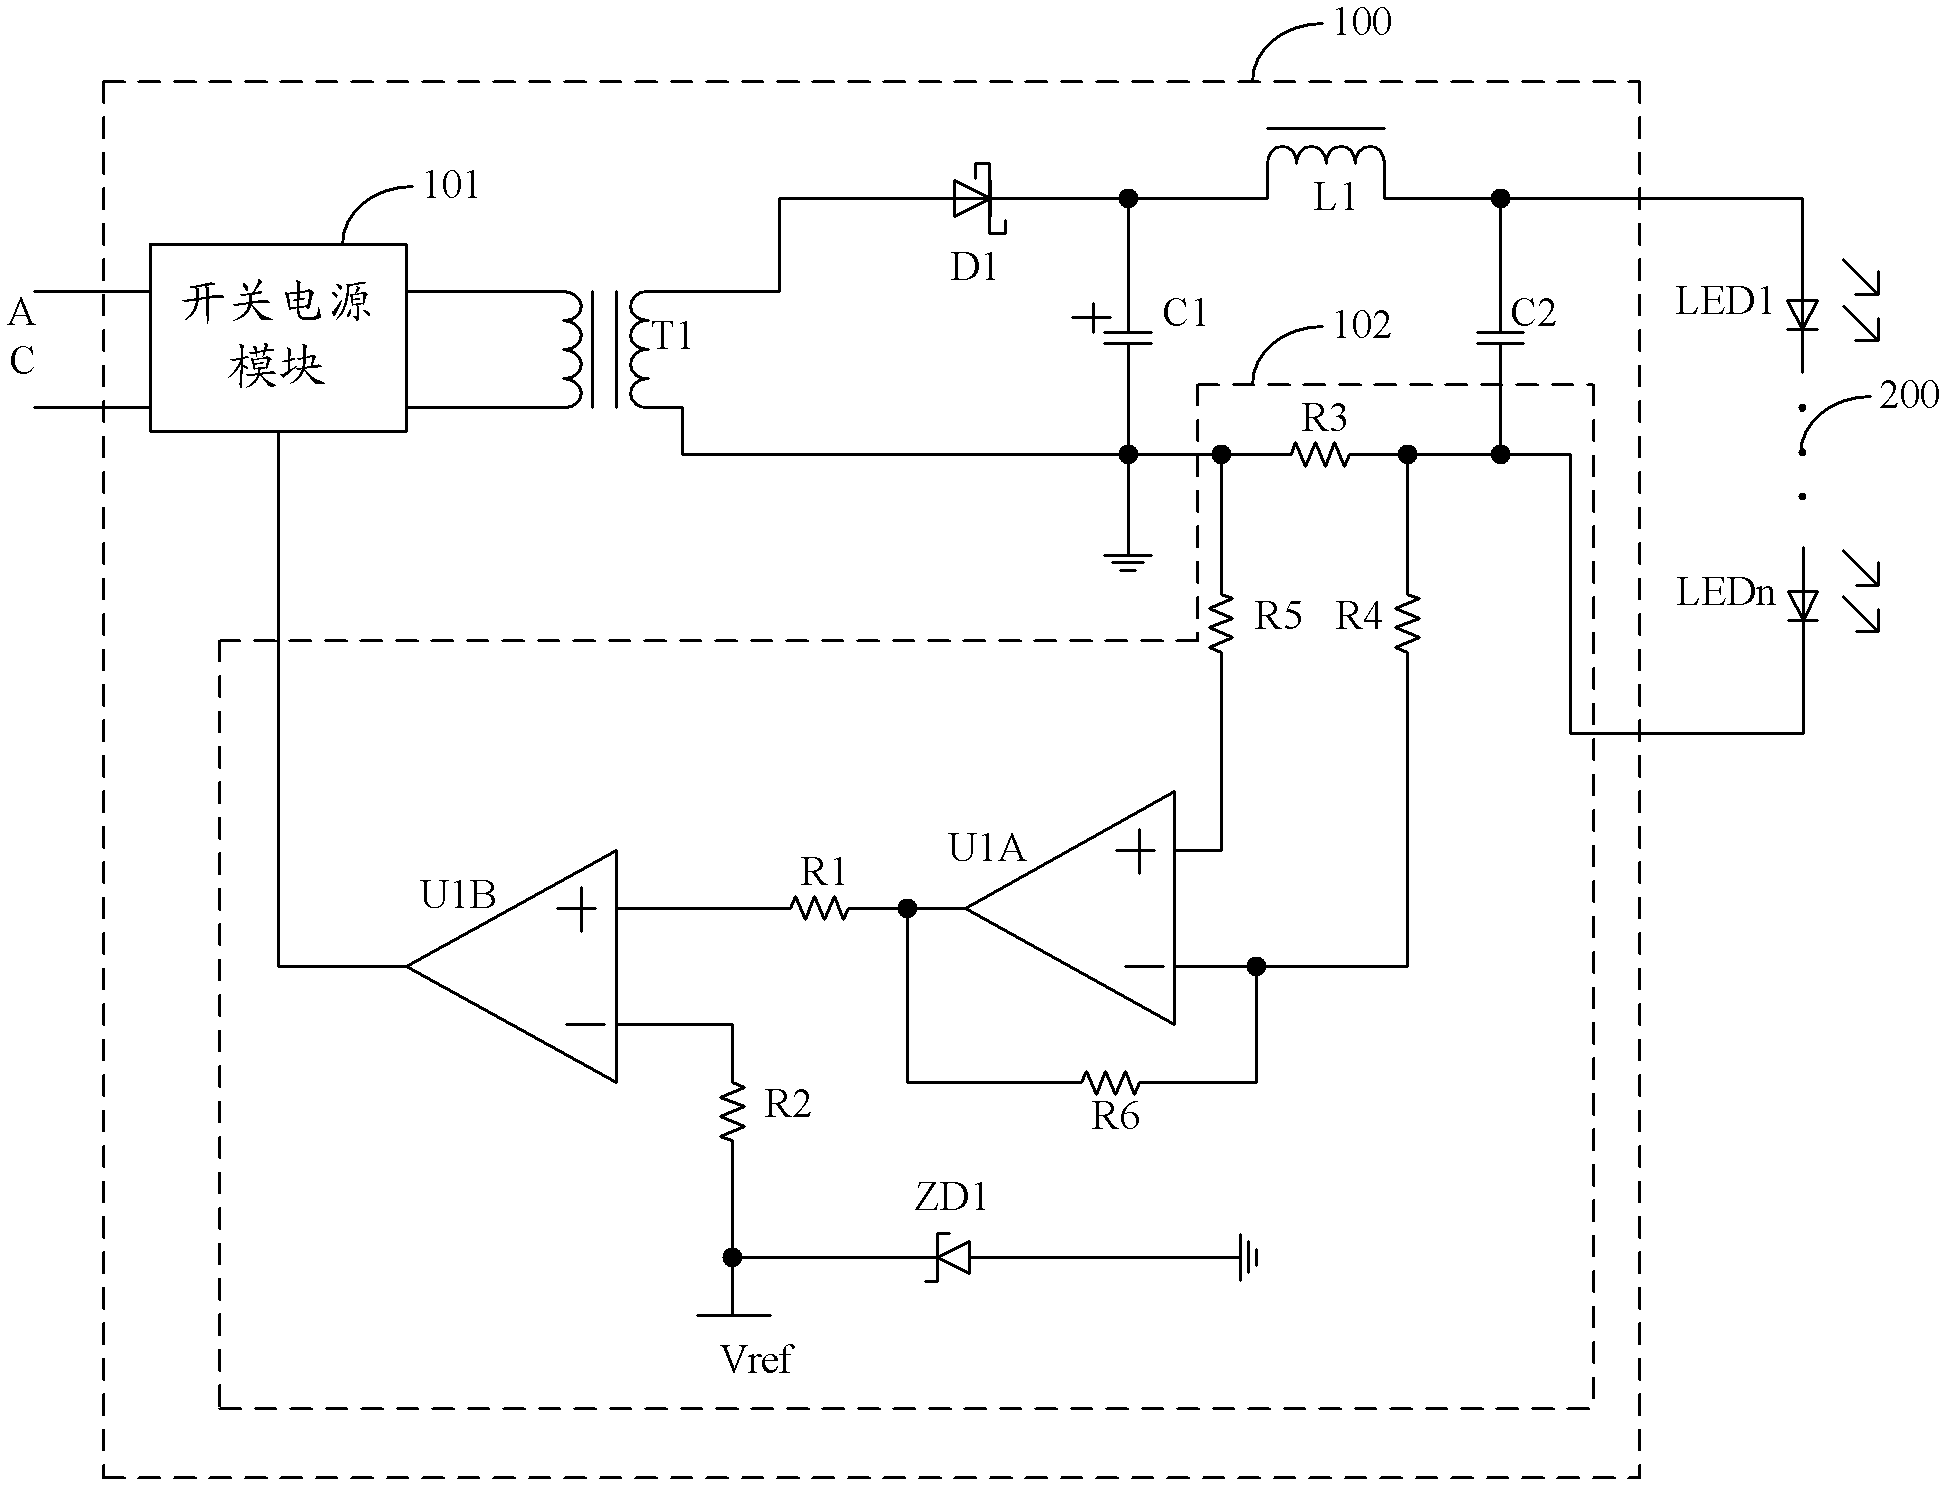 Over-current protection sampling circuit, light-emitting diode (LED) drive circuit and LED lamp